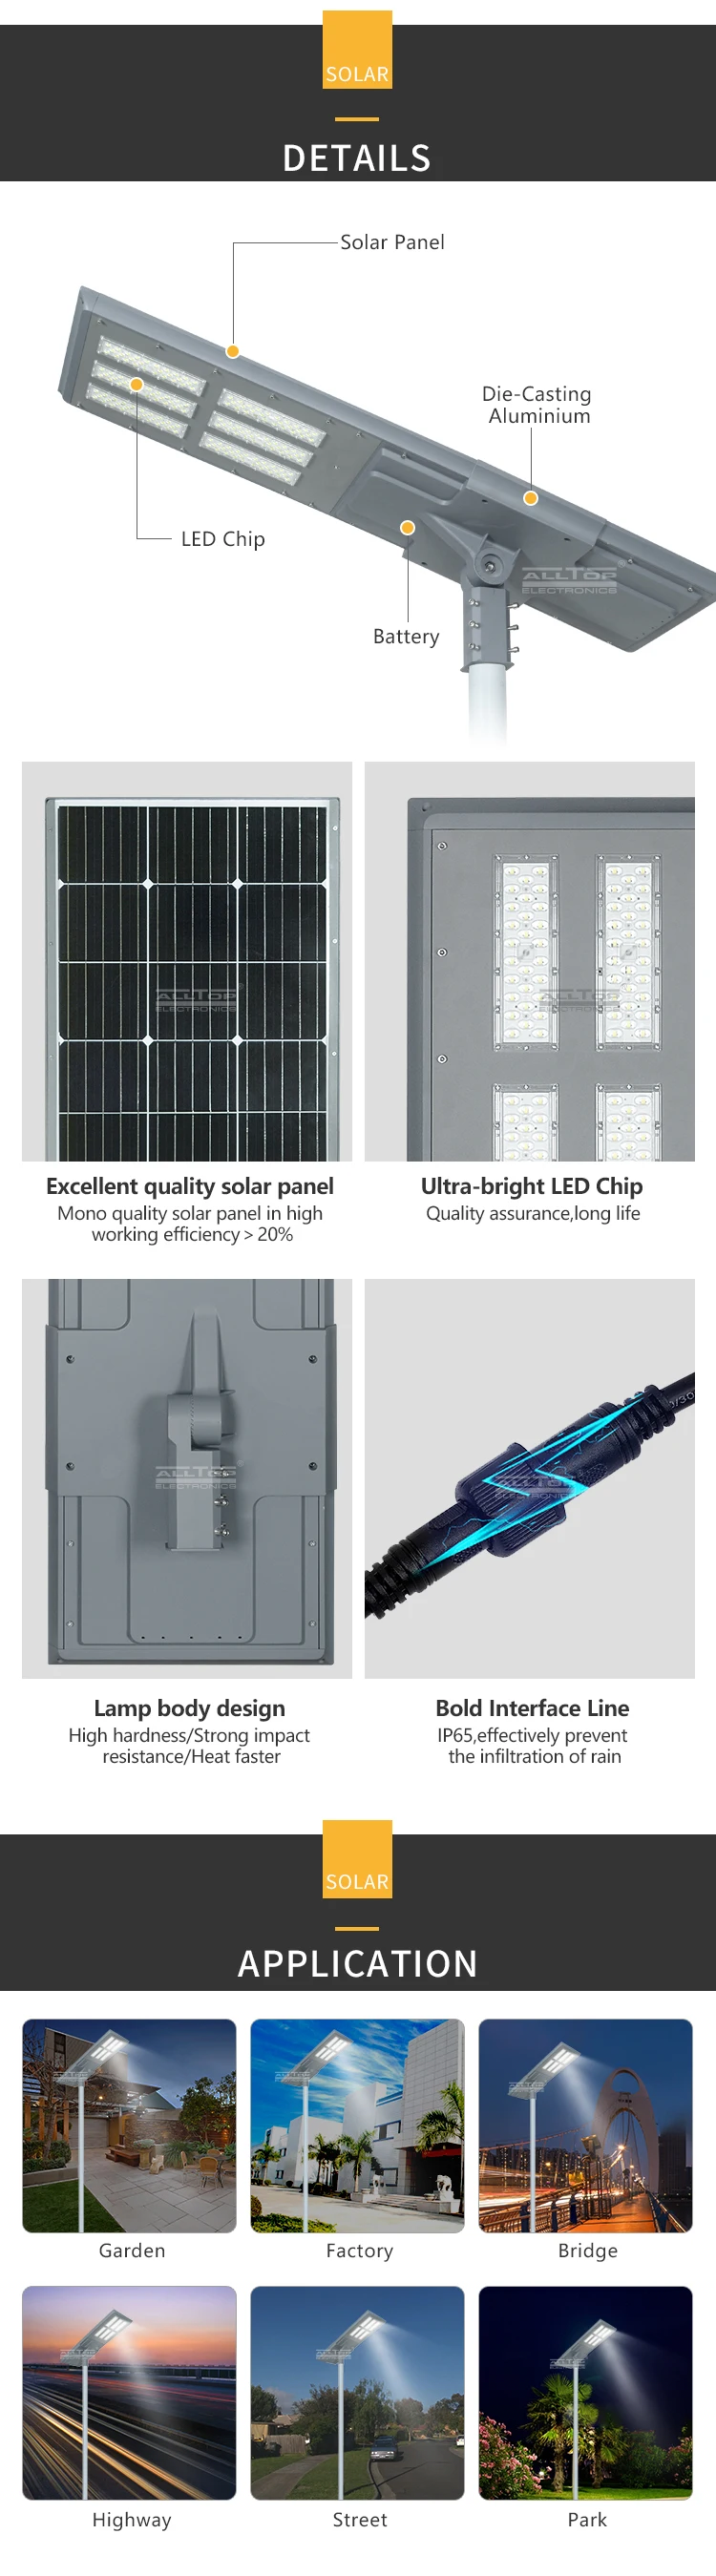 ALLTOP High quality outdoor ip65 waterproof 200w integrated all in one led solar street light